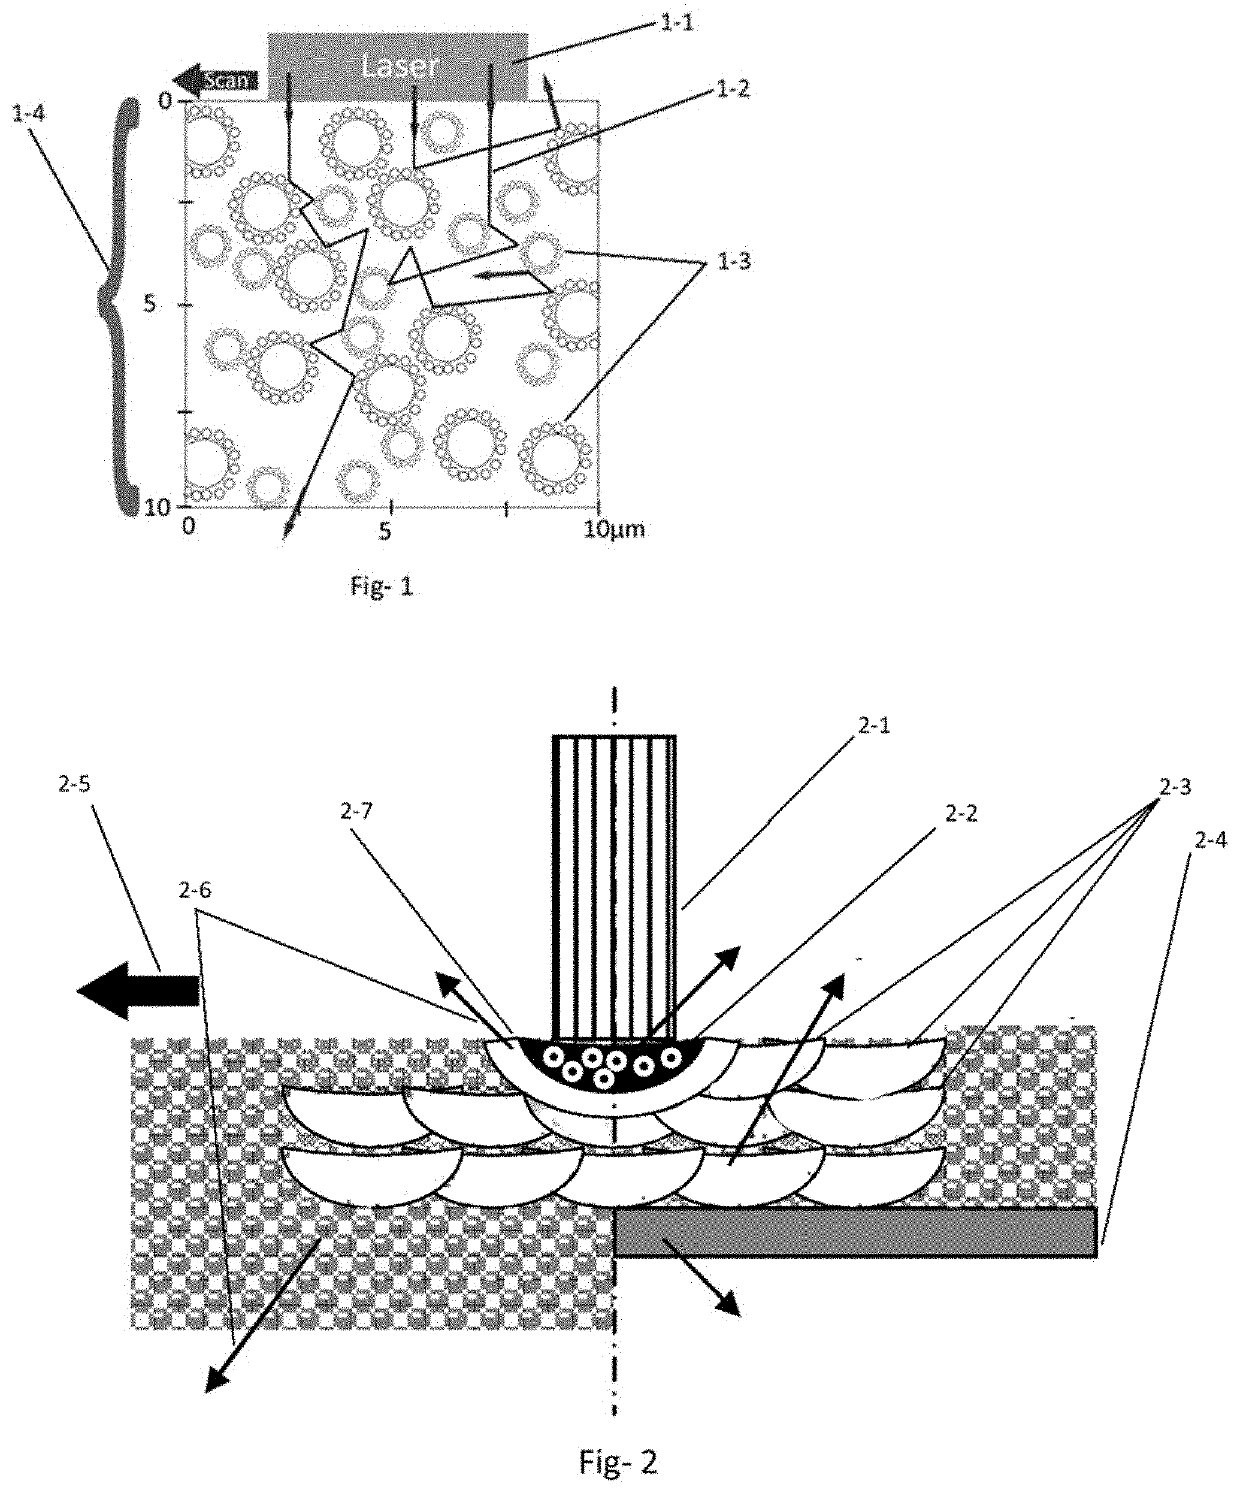 Process for manufacturing a titanium zirconium alloy and its embodiment by additive manufacturing